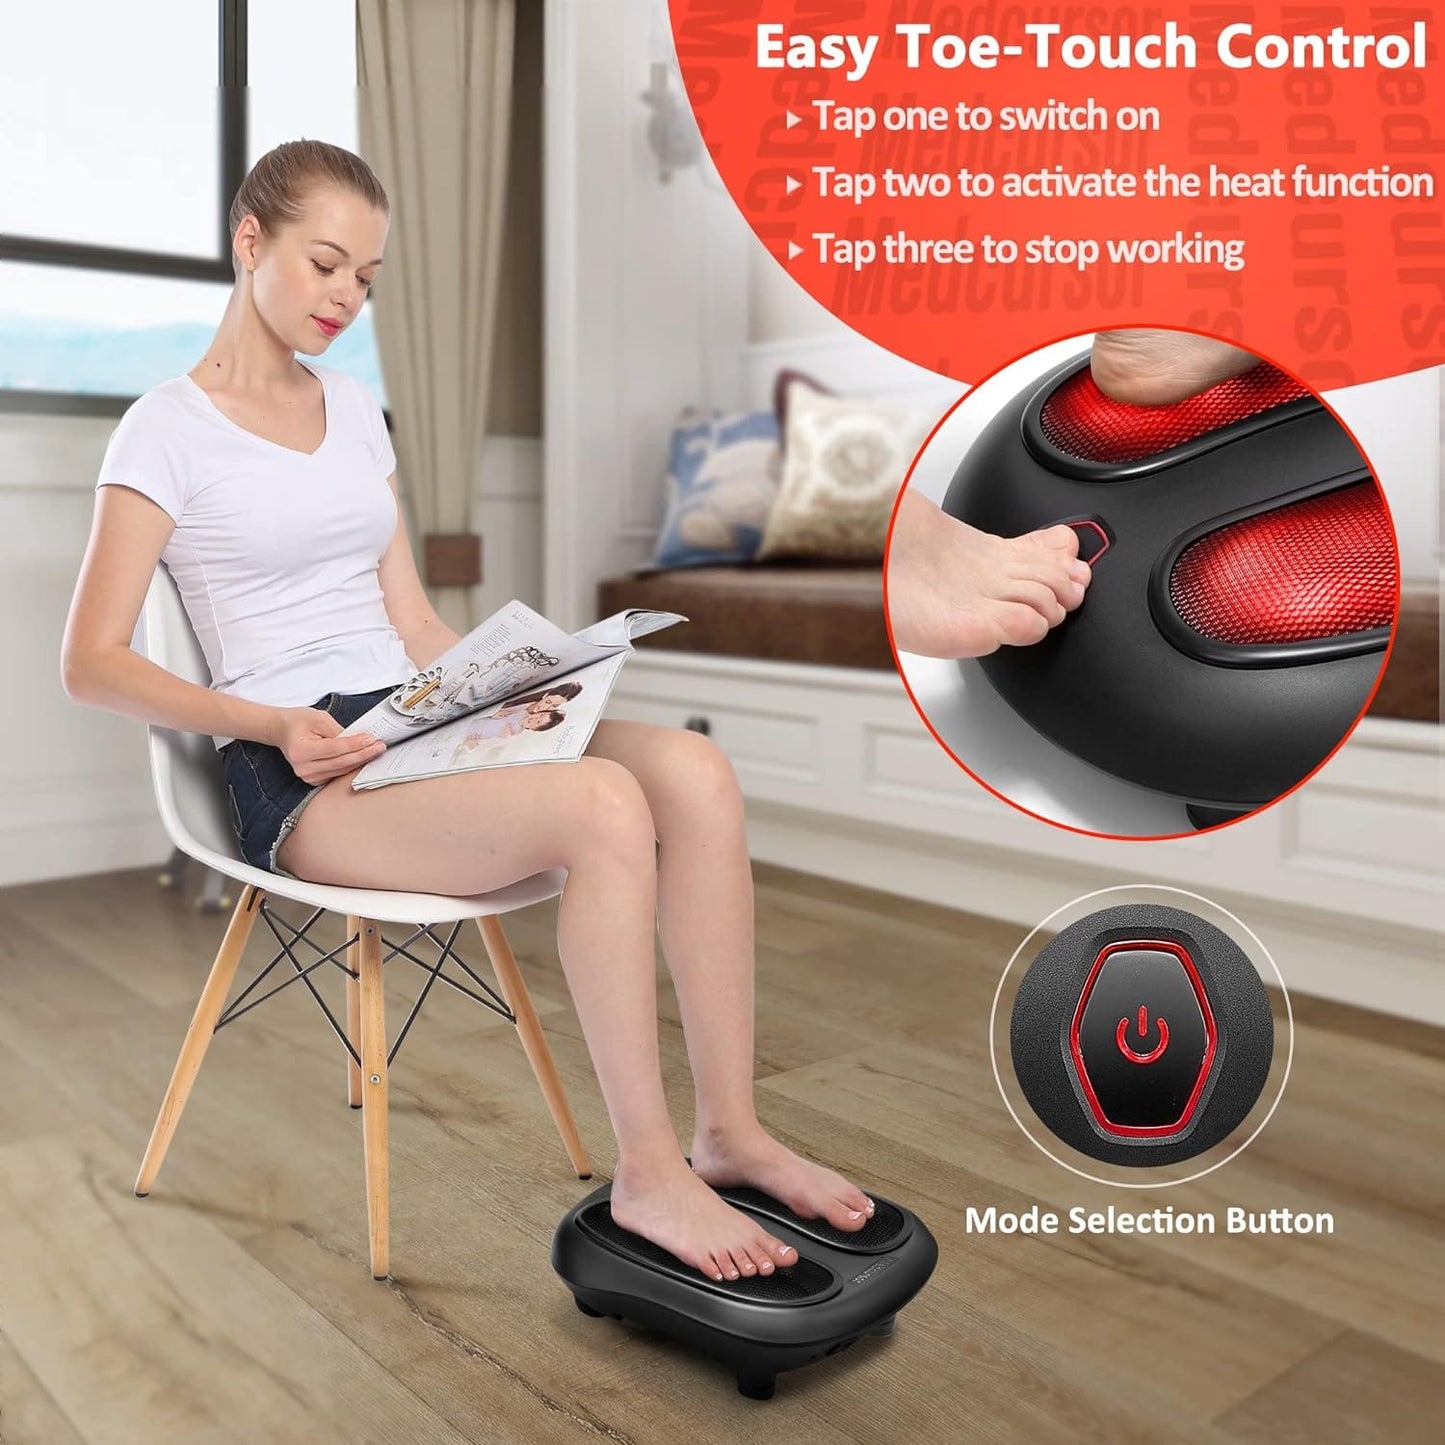 Medcursor Shiatsu Foot Massager with Heat, Electric Deep Kneading Massage Machine for Muscle Fatigue Relief, Improve Body Circulation for Home and Office Use, Black